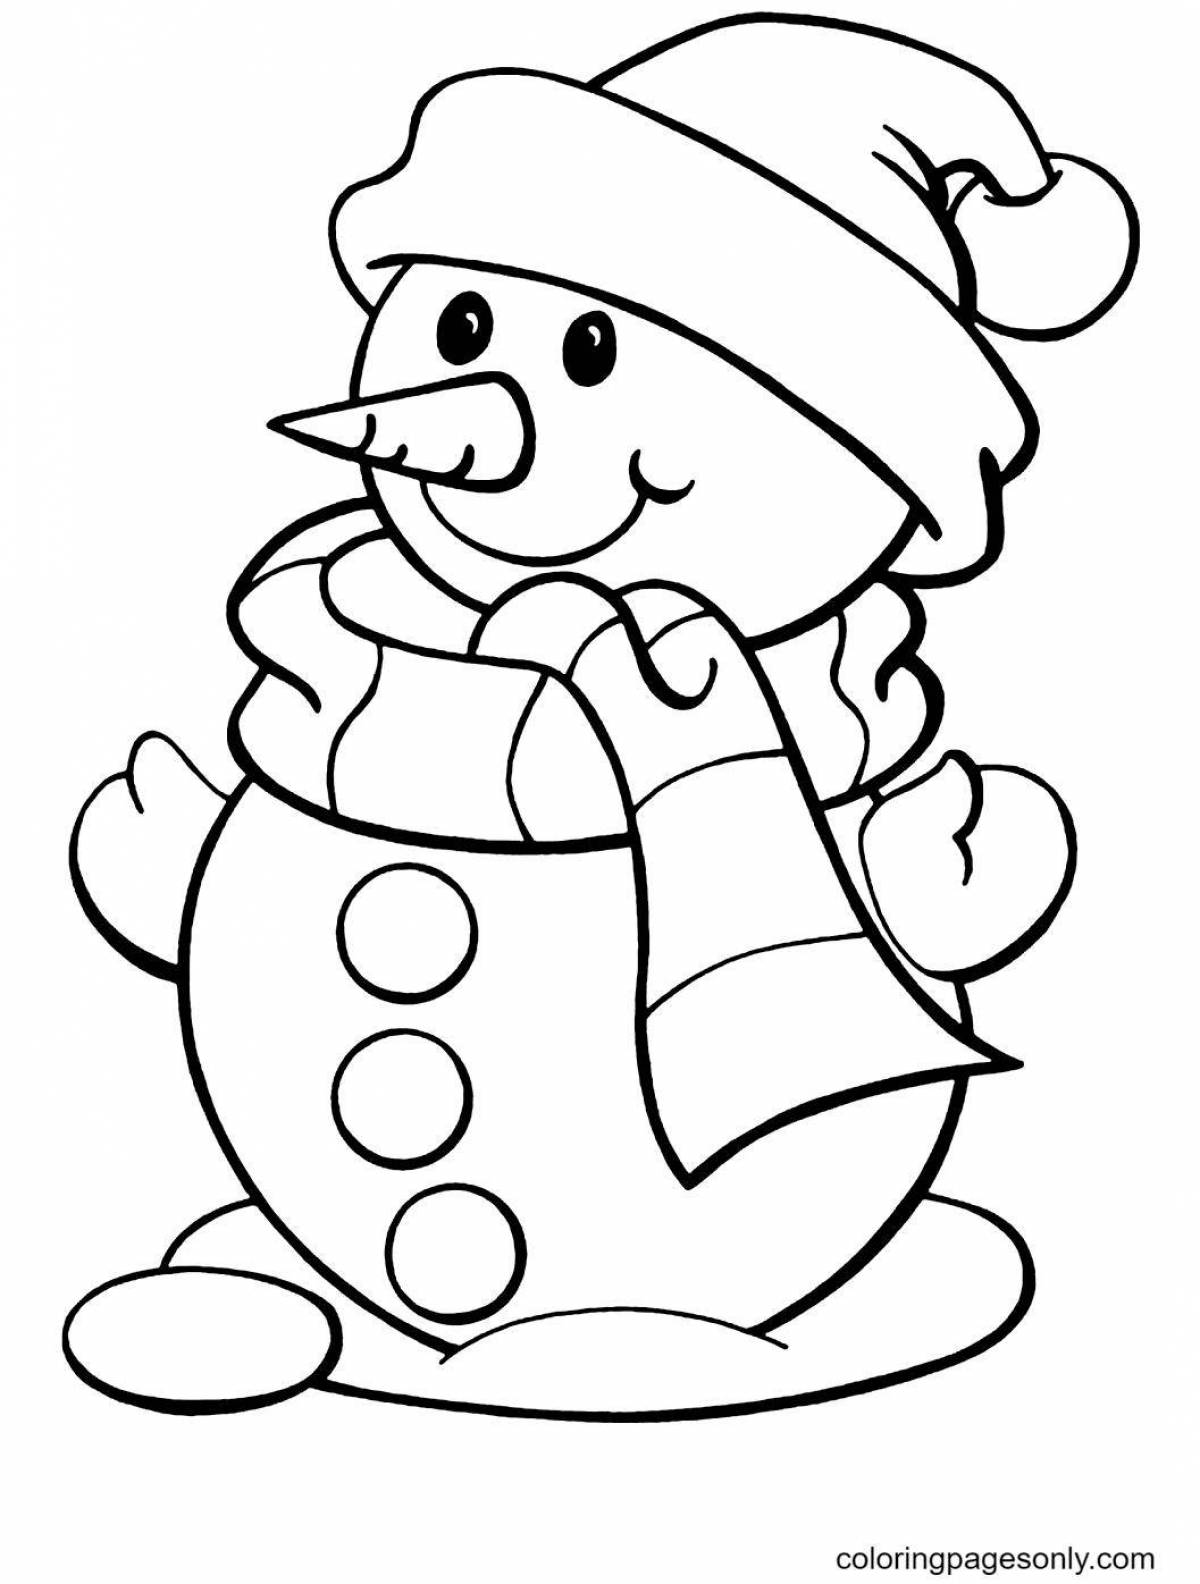 Holiday coloring funny snowman for kids